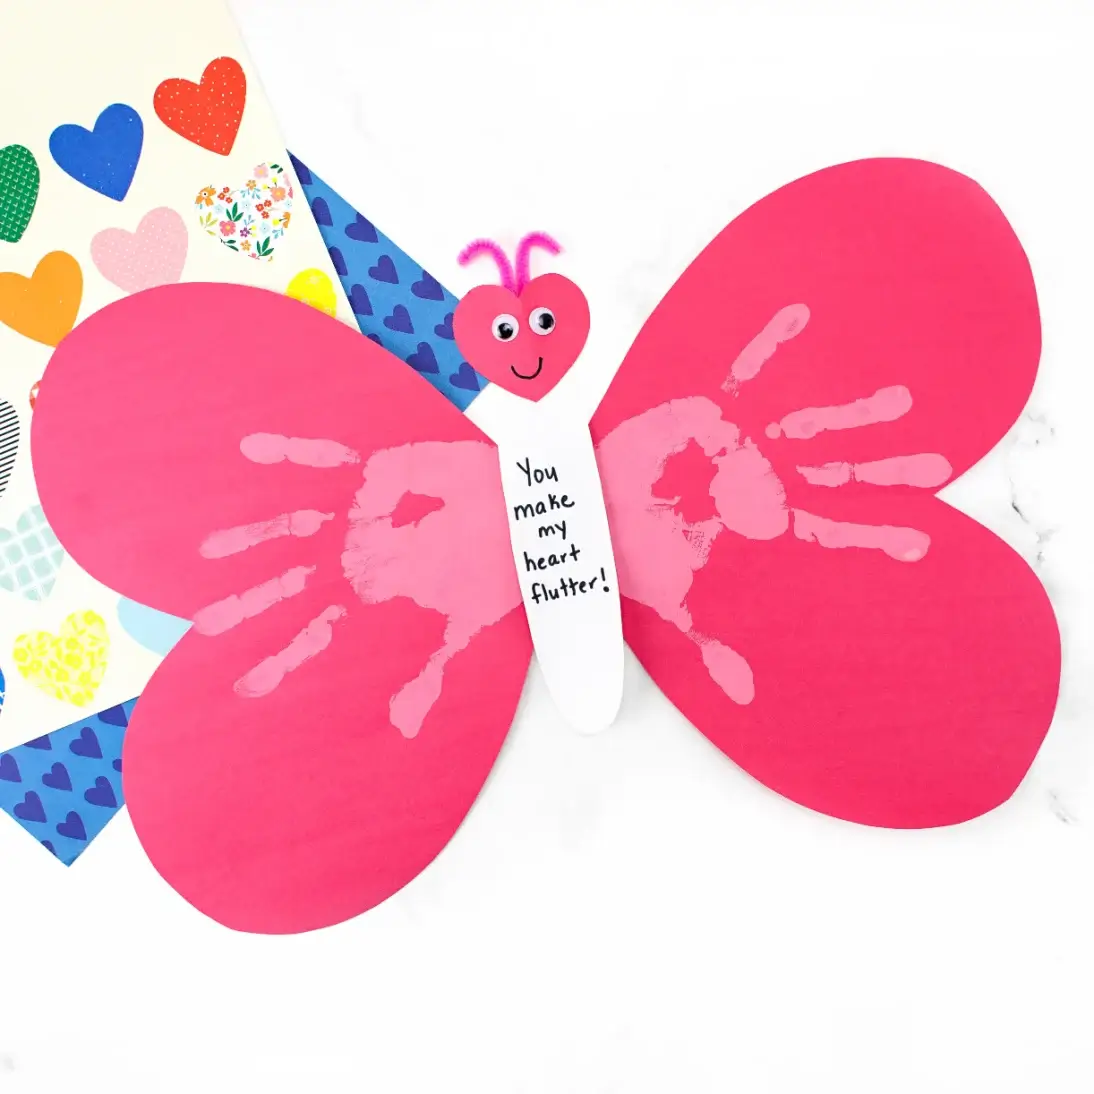 Valentine crafts for preschoolers with Paint and Colors